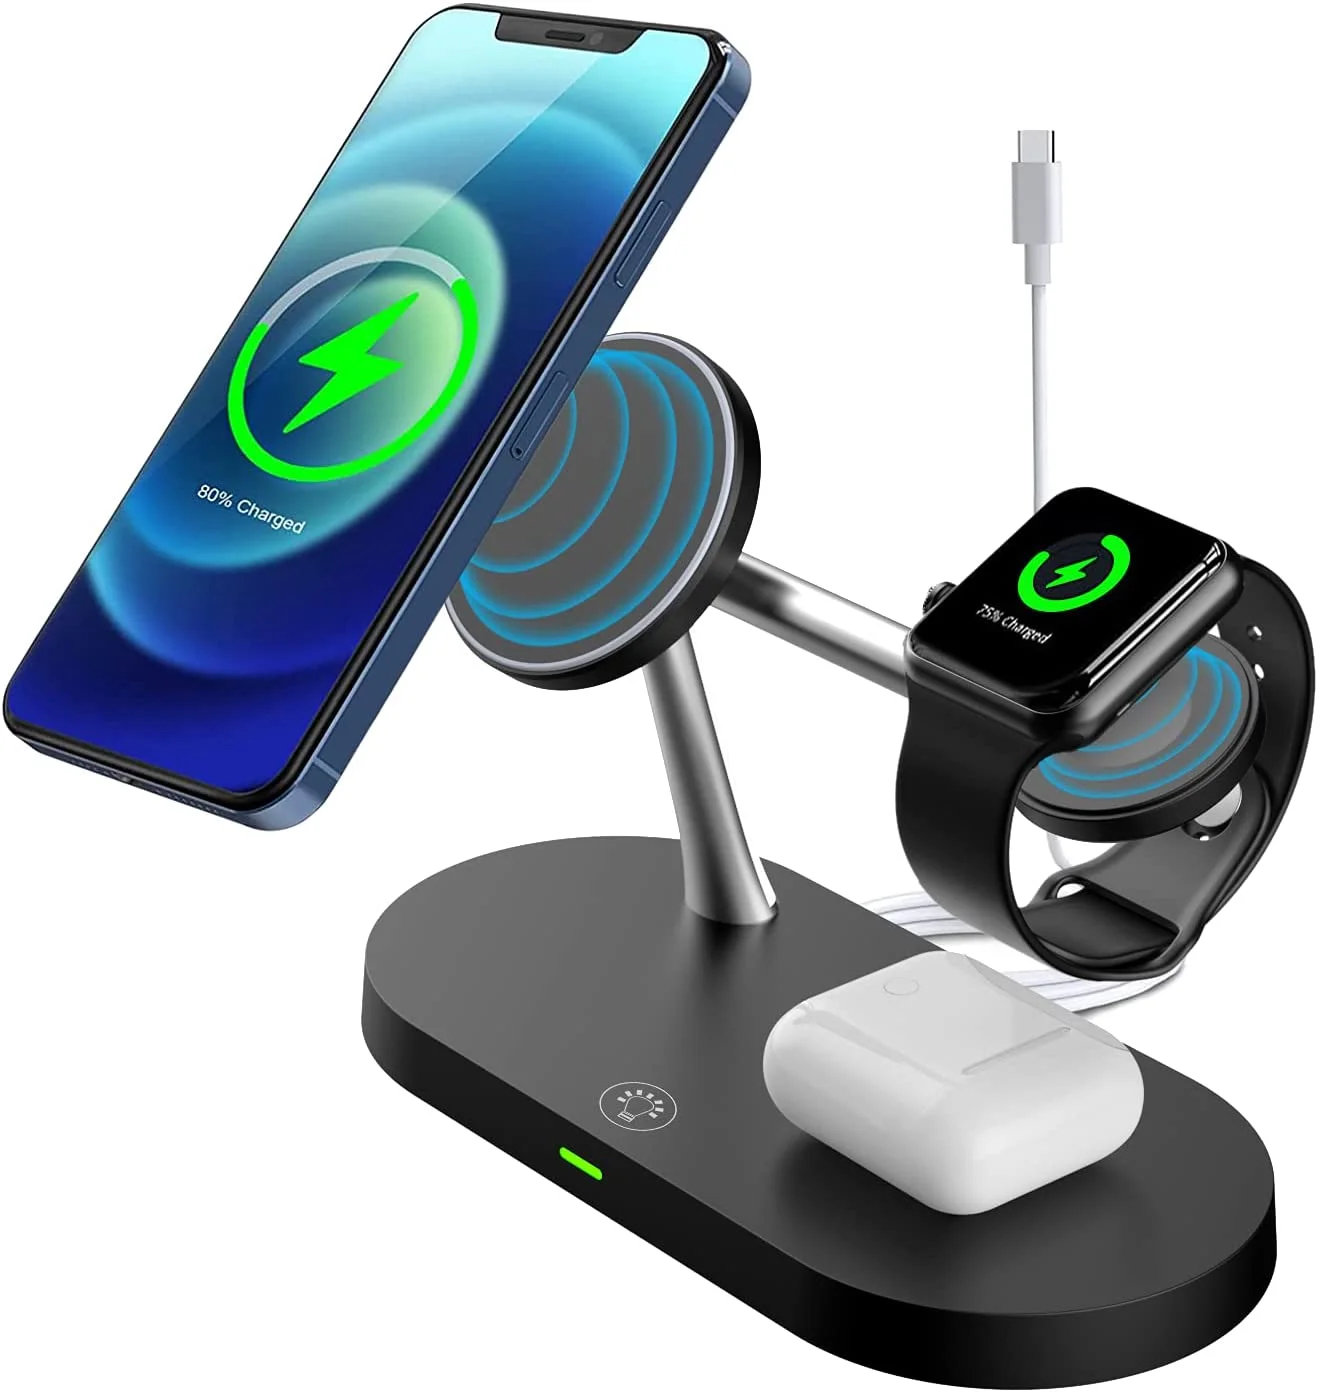 

unique gadgets electronic 2022 2021 5 in 1 Magnetic Wireless Charger,Mag-Safe Charger,15W for iPhone 12/13/Pro/Max, I-Watch 7, Black, white